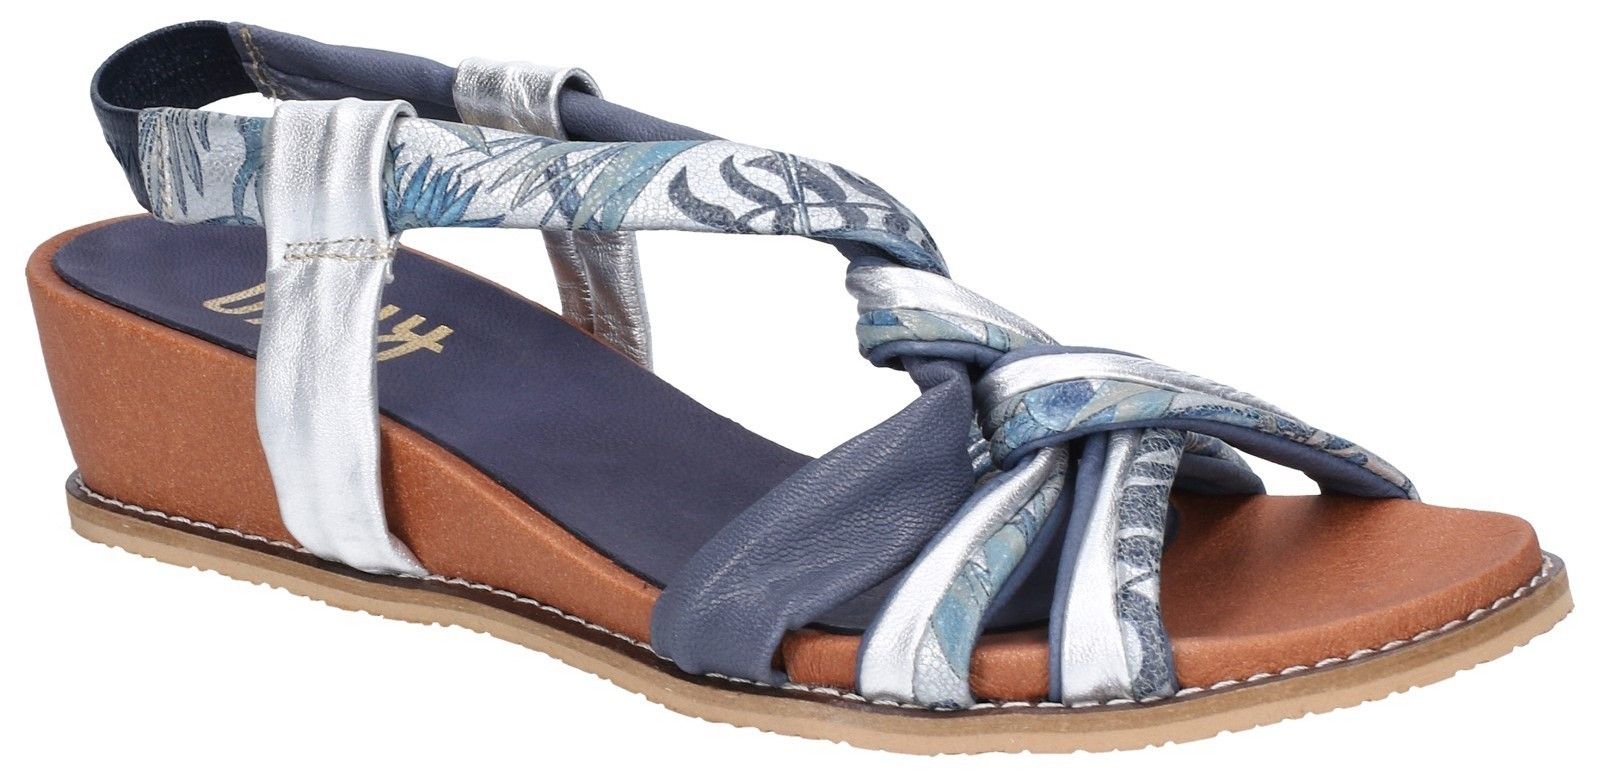 Women's low wedge caged strappy sandal crafted with luxuriously supple multi-leathers. A chic sling-back strap keeps this beach style secure and comfortable.Luxuriously supple multi-leather uppers. 
Strappy sandal with knotted caged open toe area. 
Comfortable sling-back strap. 
Stylish low wedge heel.